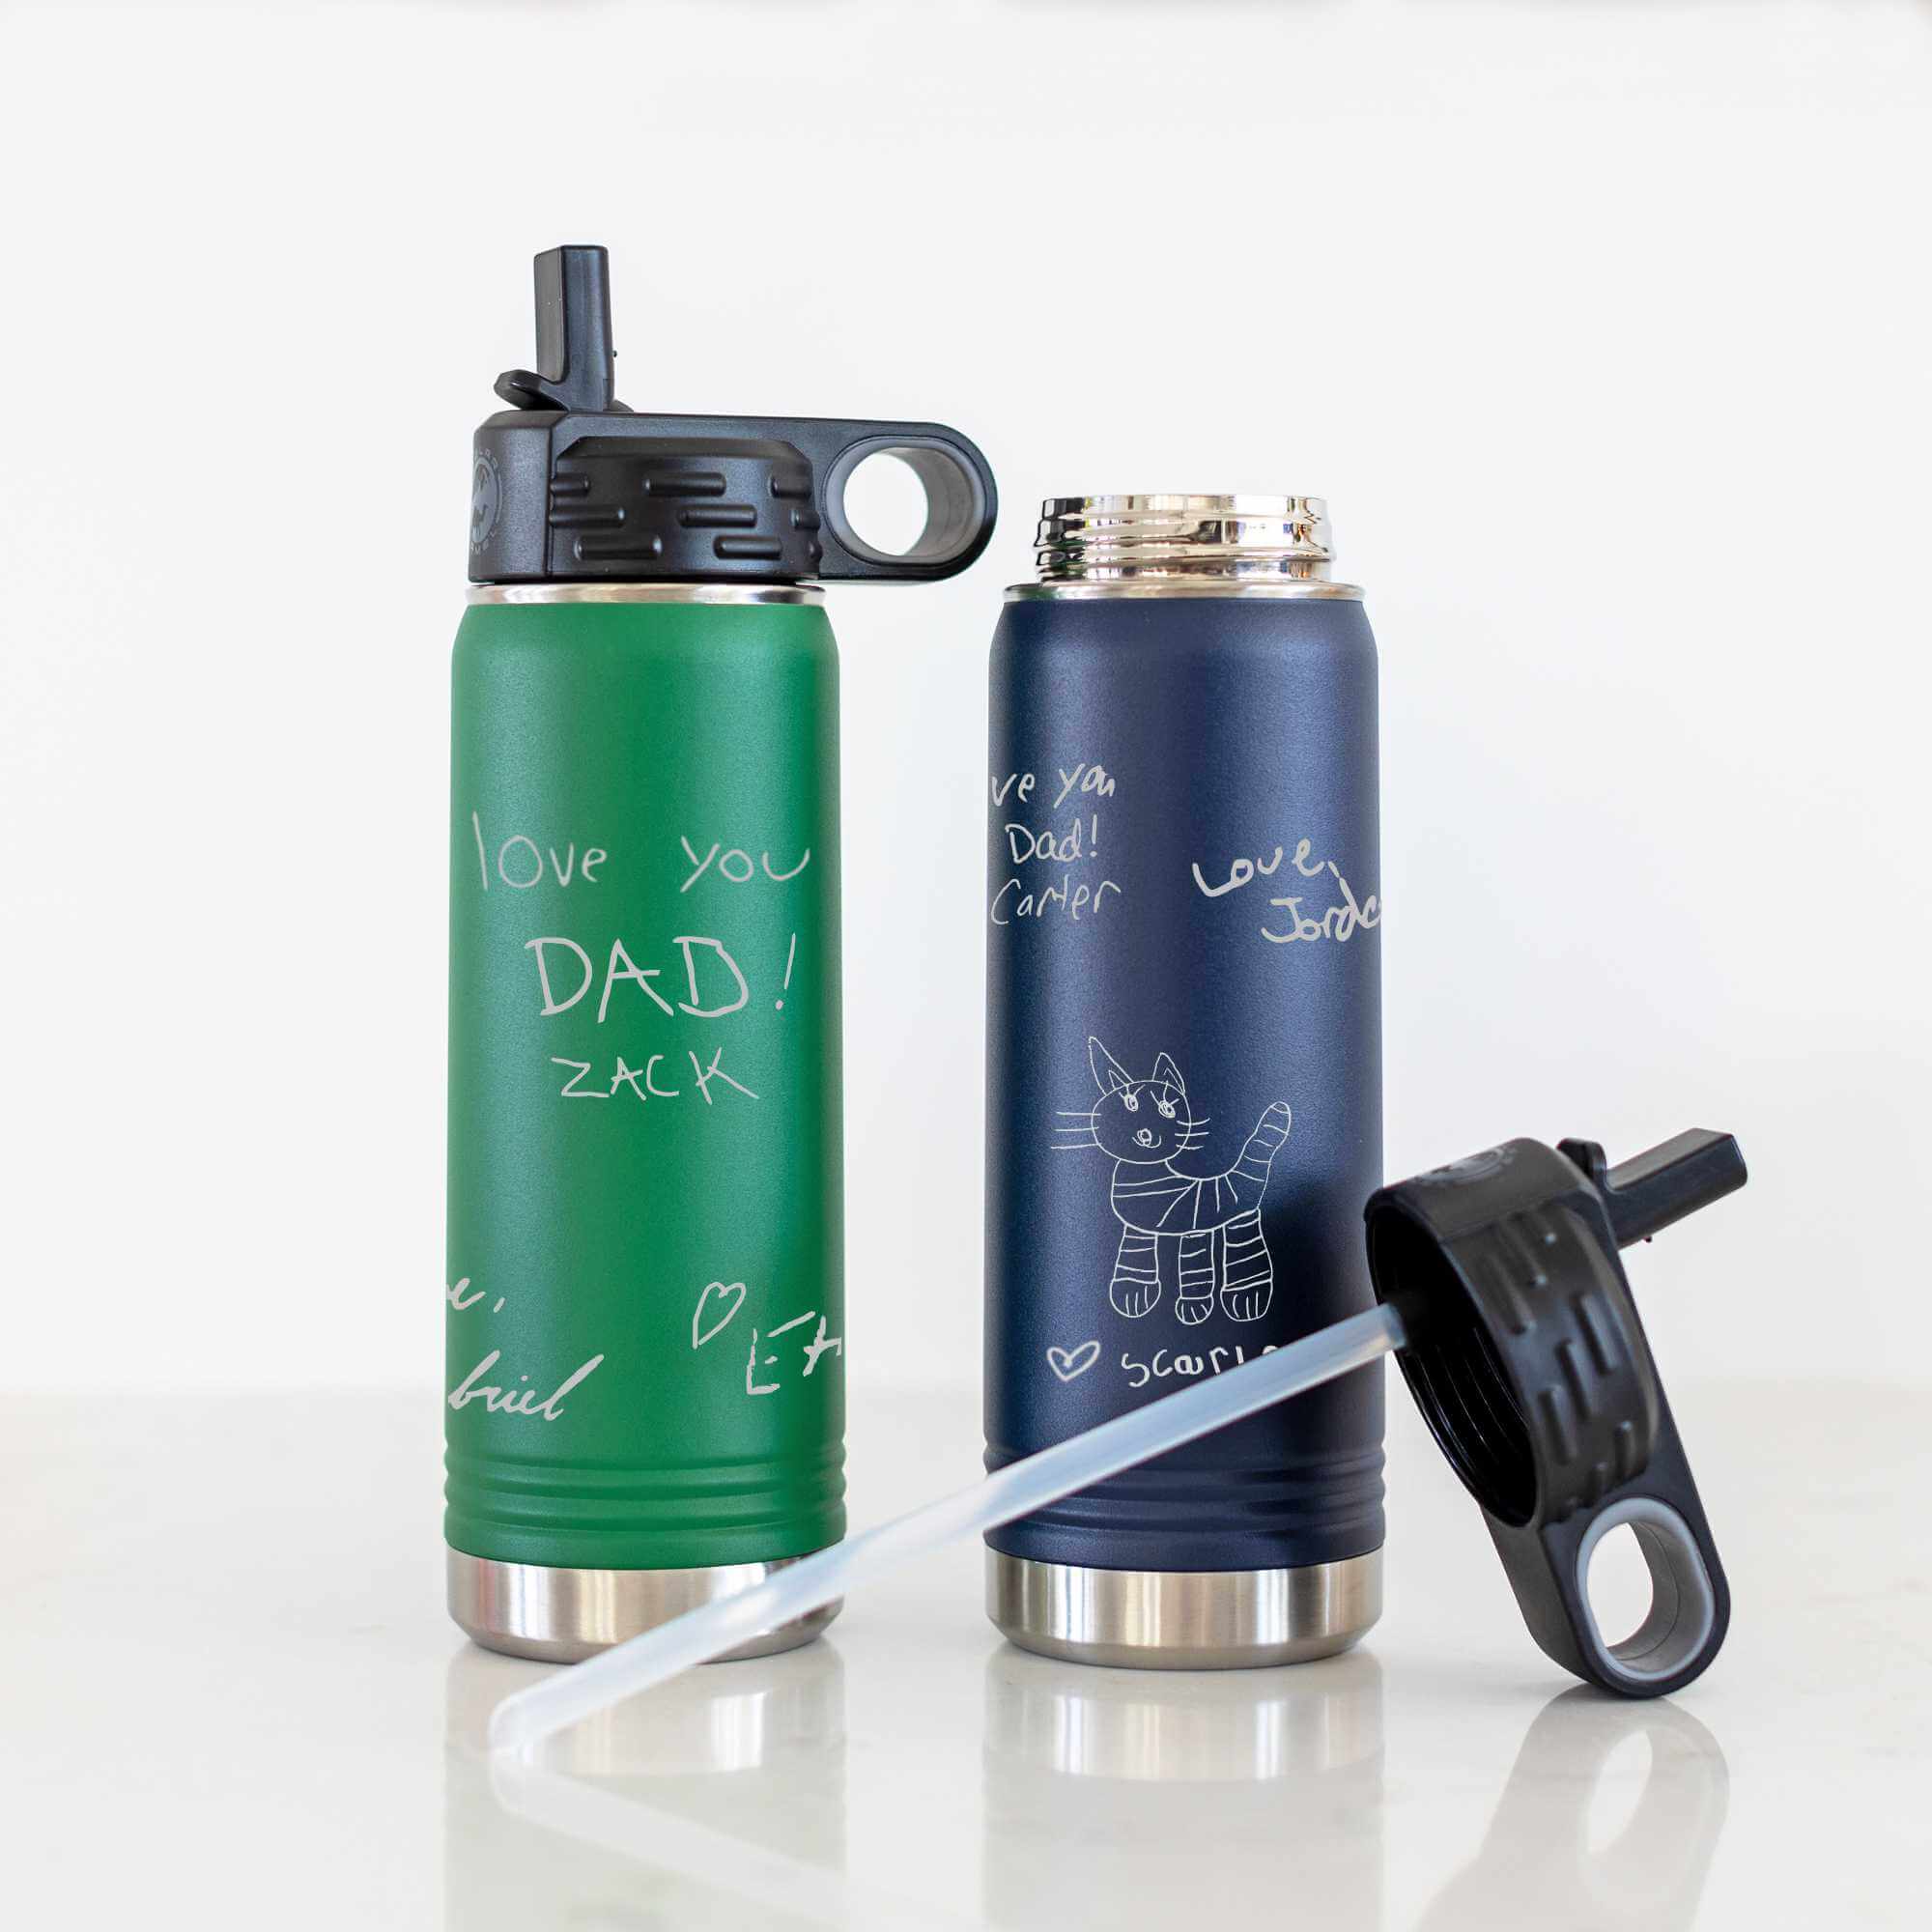 Stainless Steel water bottle 20 oz with option for engraving